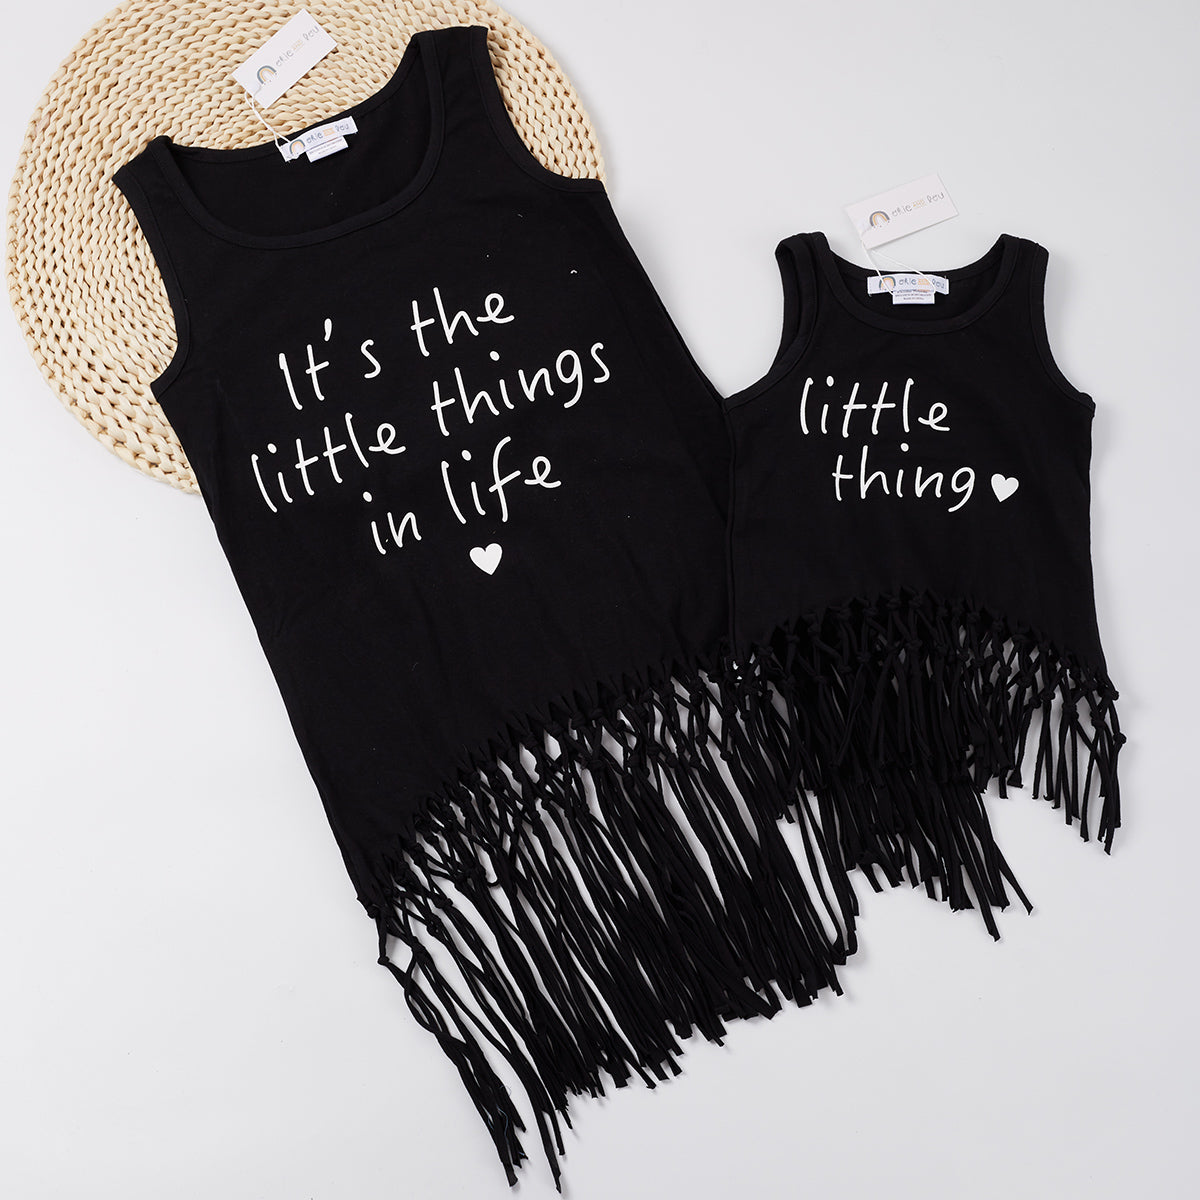 Little Thing - Mommy + Me - Mom&#39;s Shirt